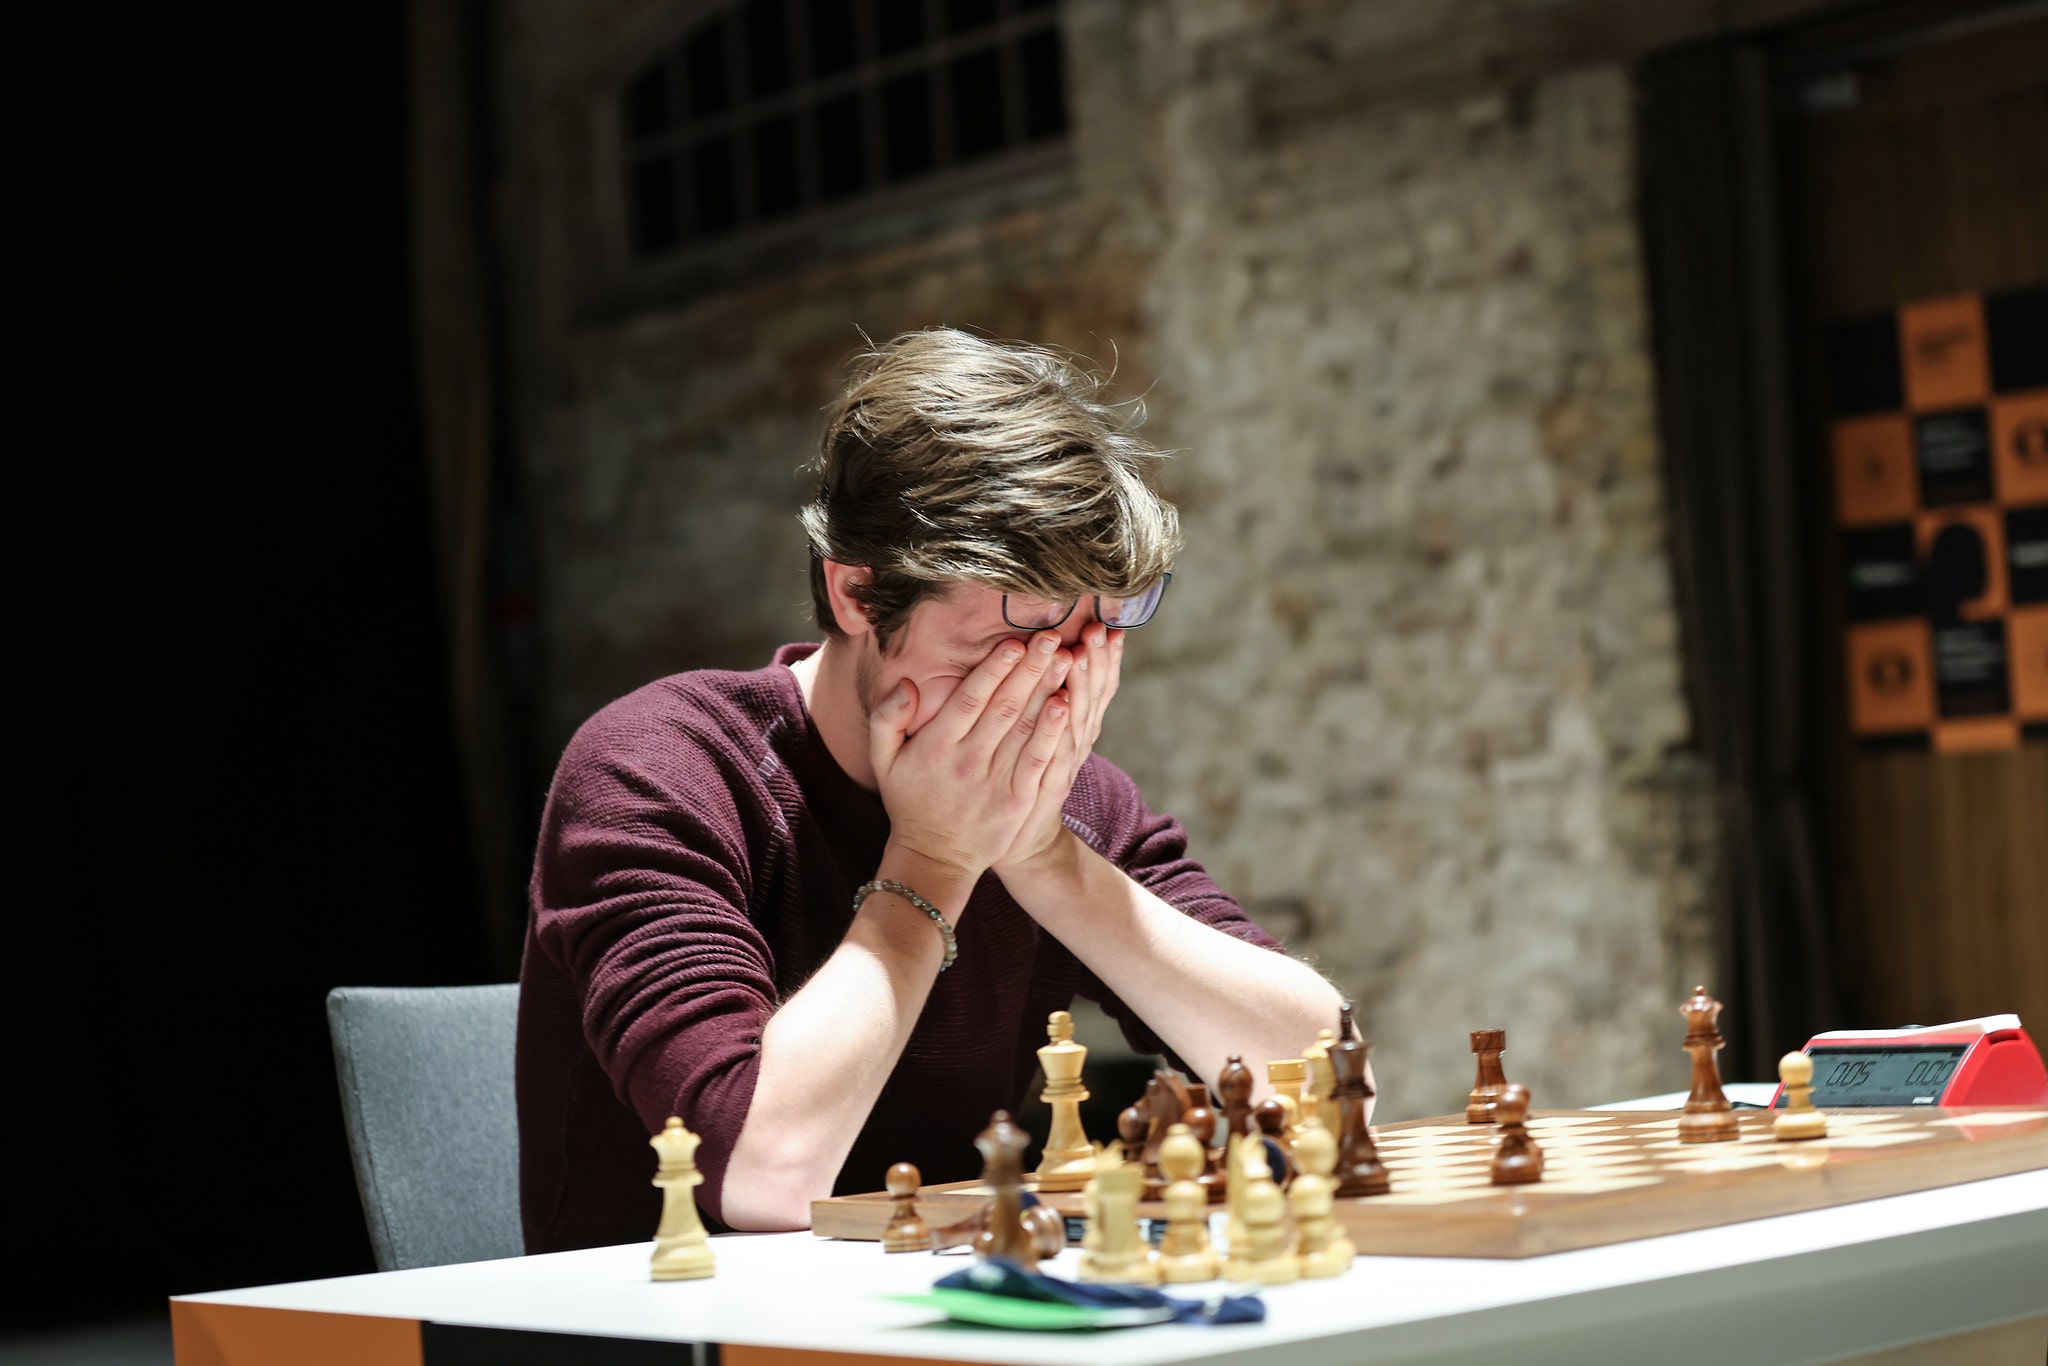 Young players are pushing forward at the Mikhail Tal 85th